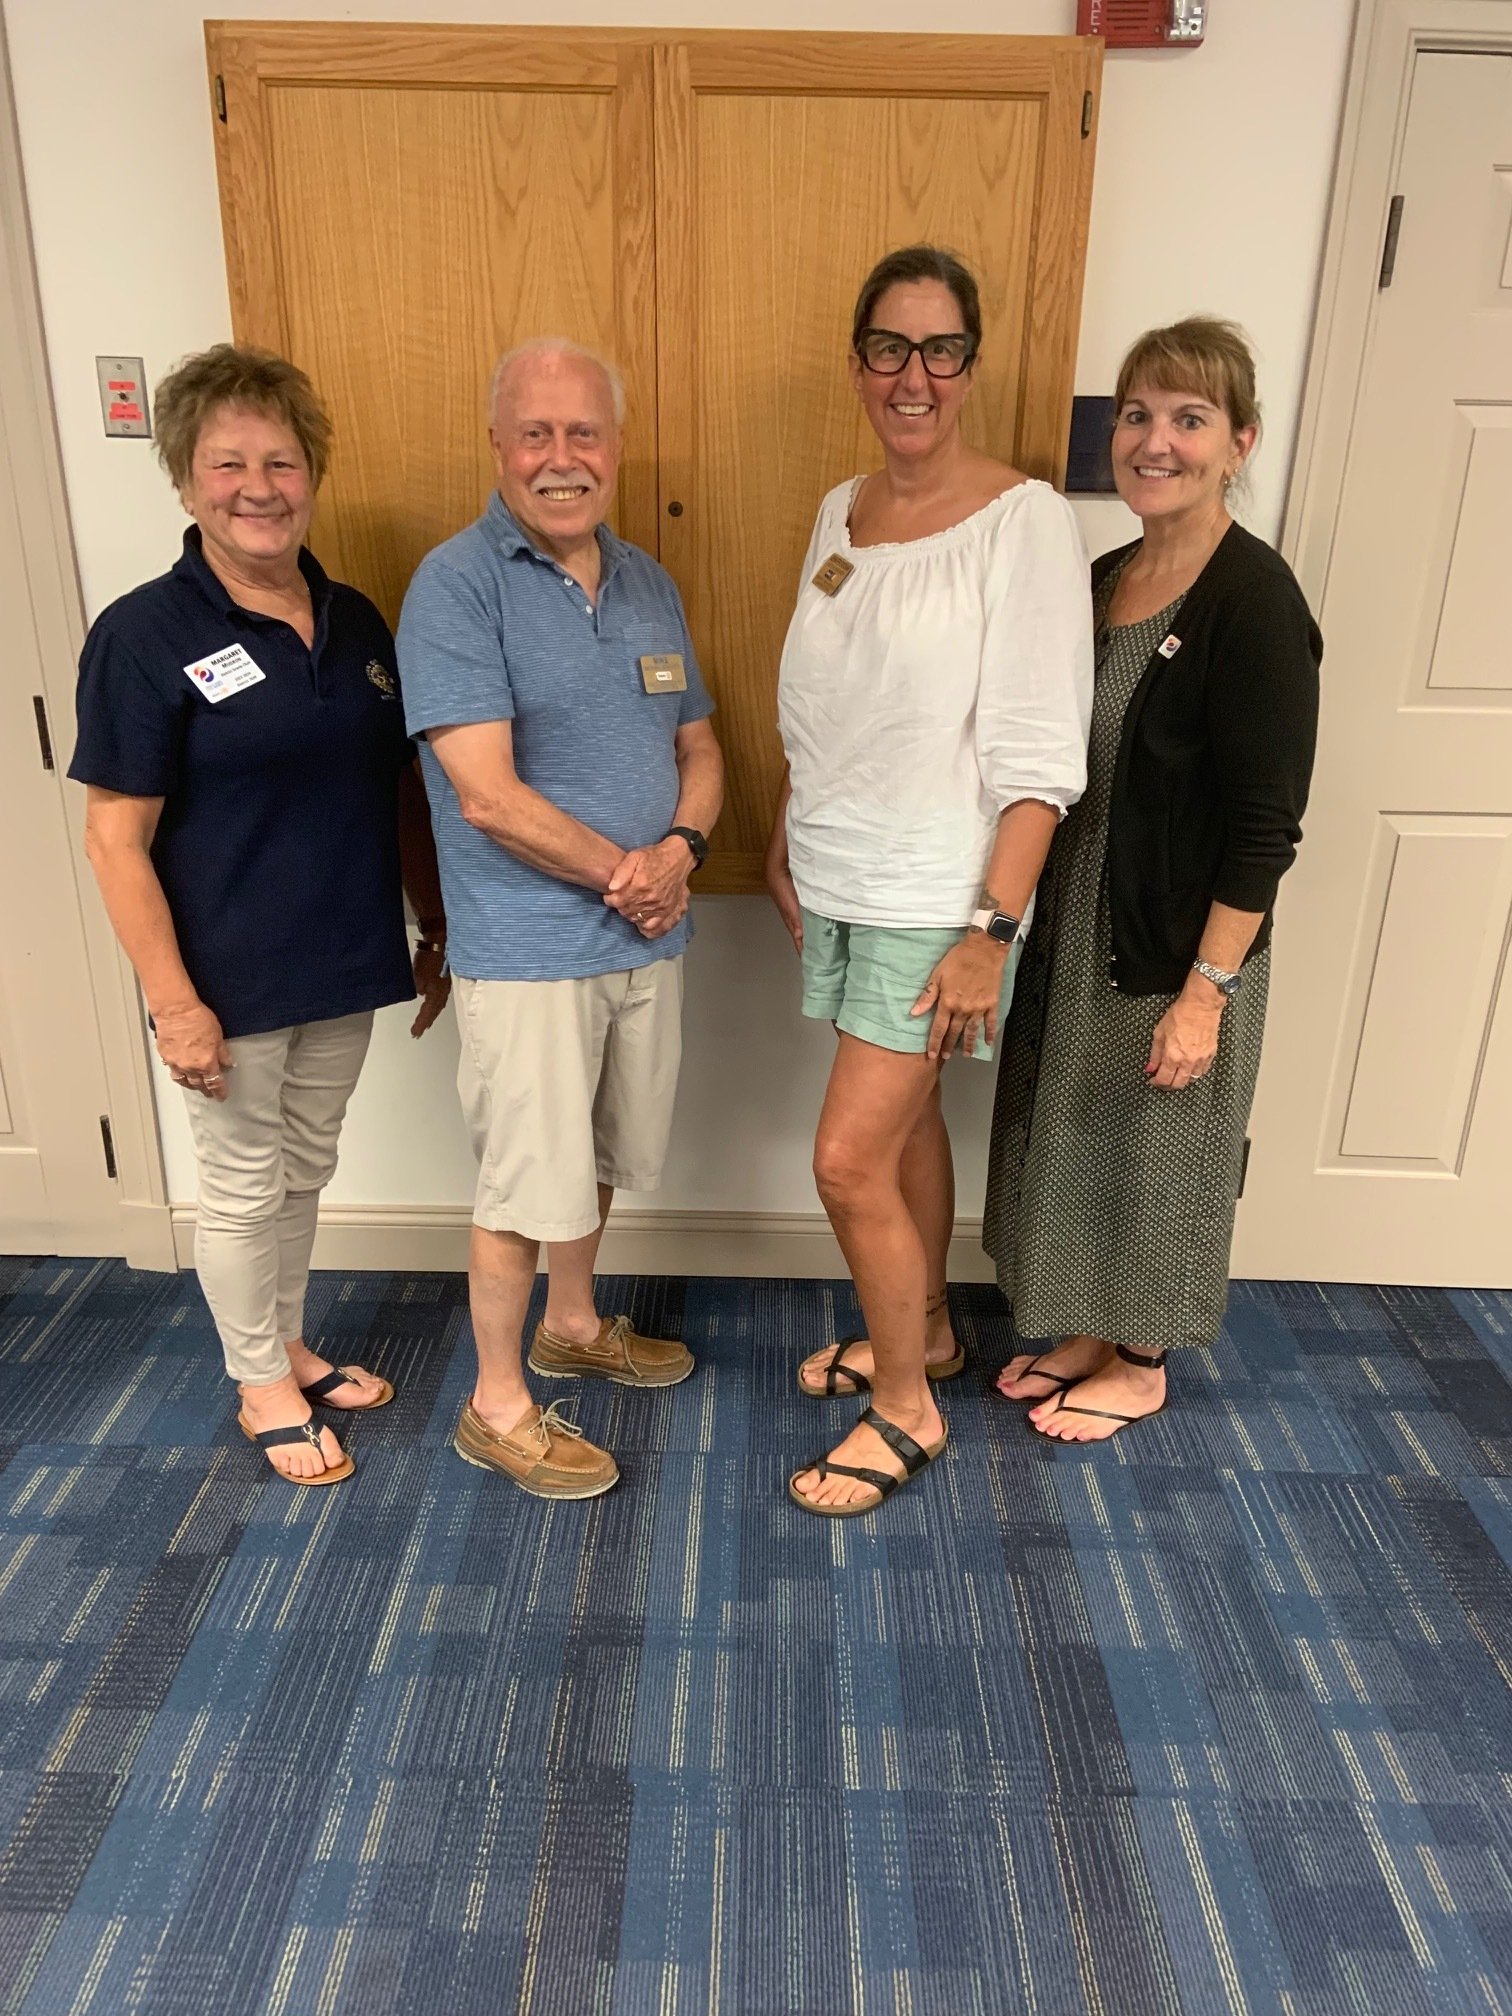  The Ocean City -  Berlin Rotary Club installed new officers for 2023-24. Pictured from left to right Past President Margaret Mudron, Secretary Mike Simcock, President Elect/Treasurer Jennifer Bodnar and President Gina Shaffer.   